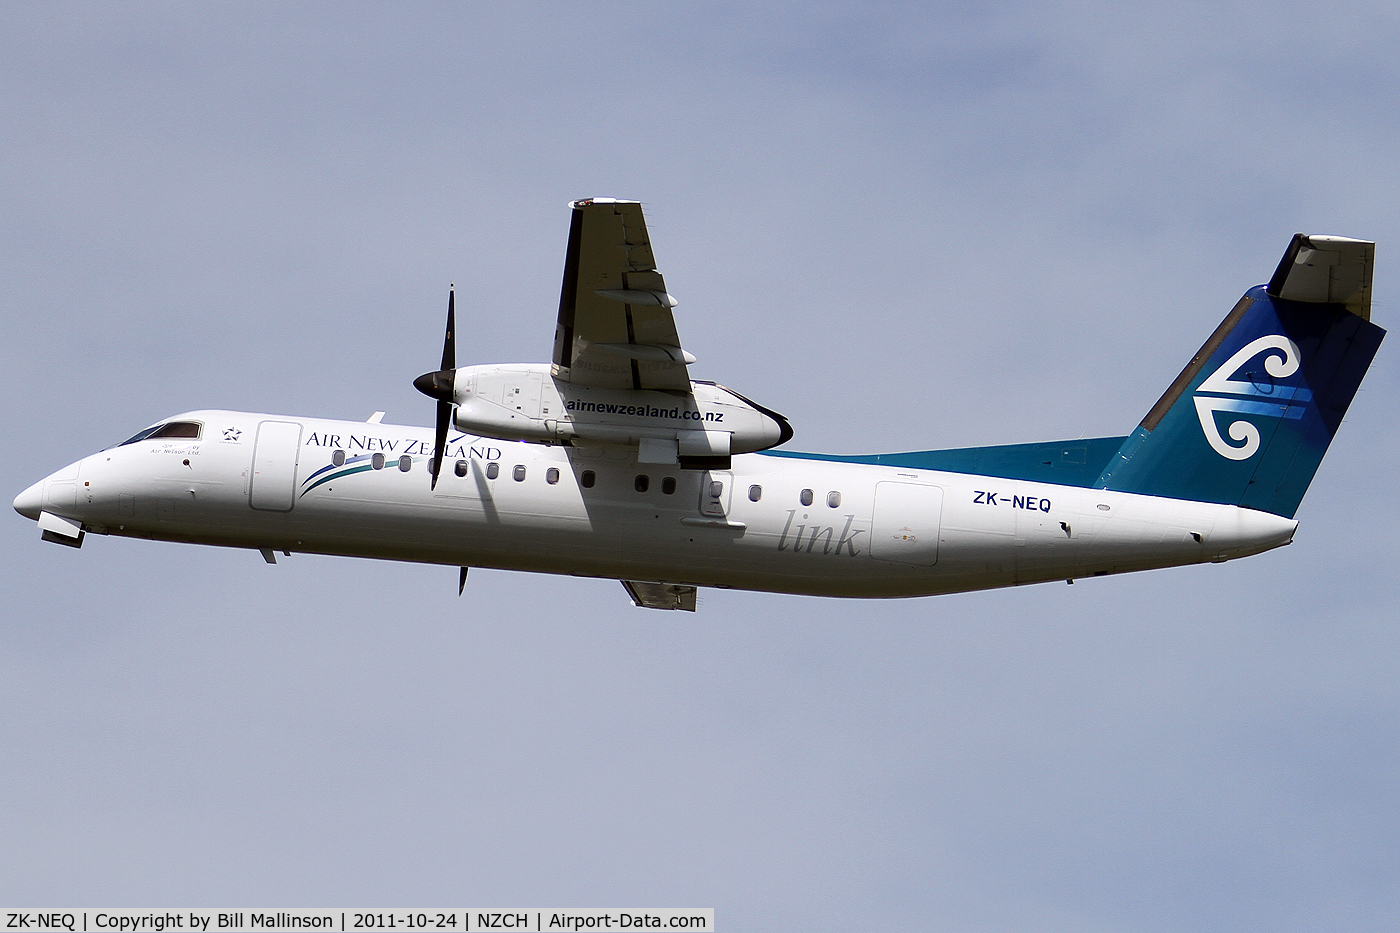 ZK-NEQ, 2007 De Havilland Canada DHC-8-311 Dash 8 C/N 636, up and away from 02